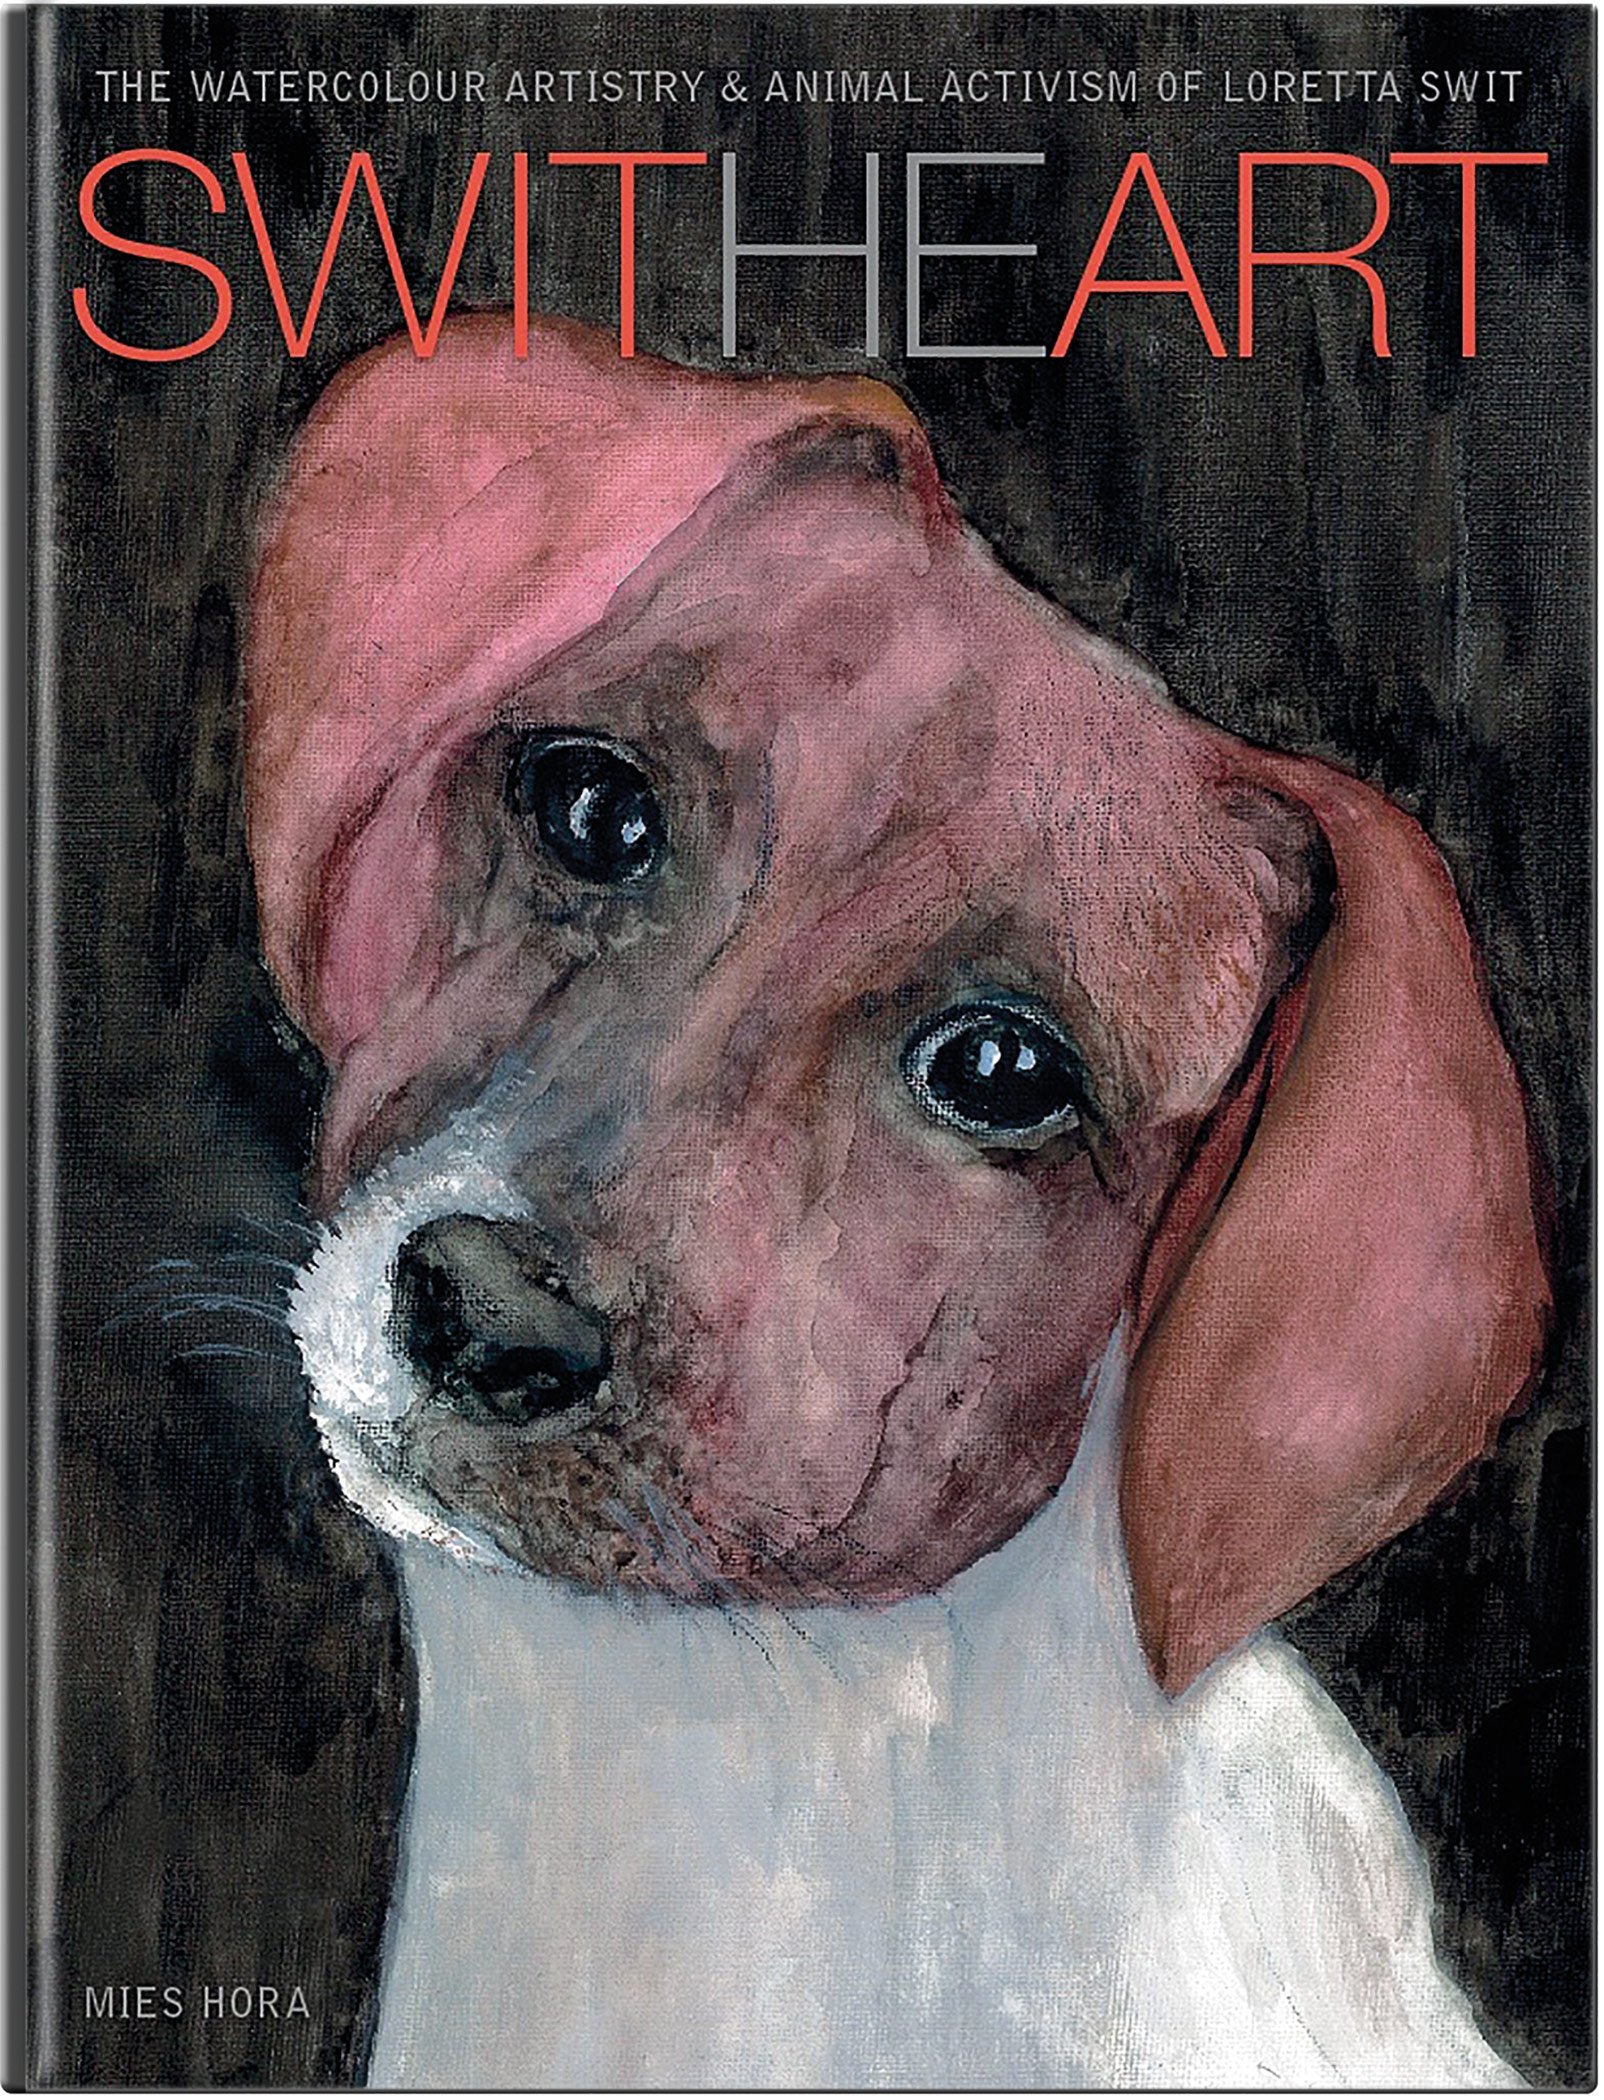 SwitHeart: The Watercolour Artistry & Animal Activism of Loretta Swit